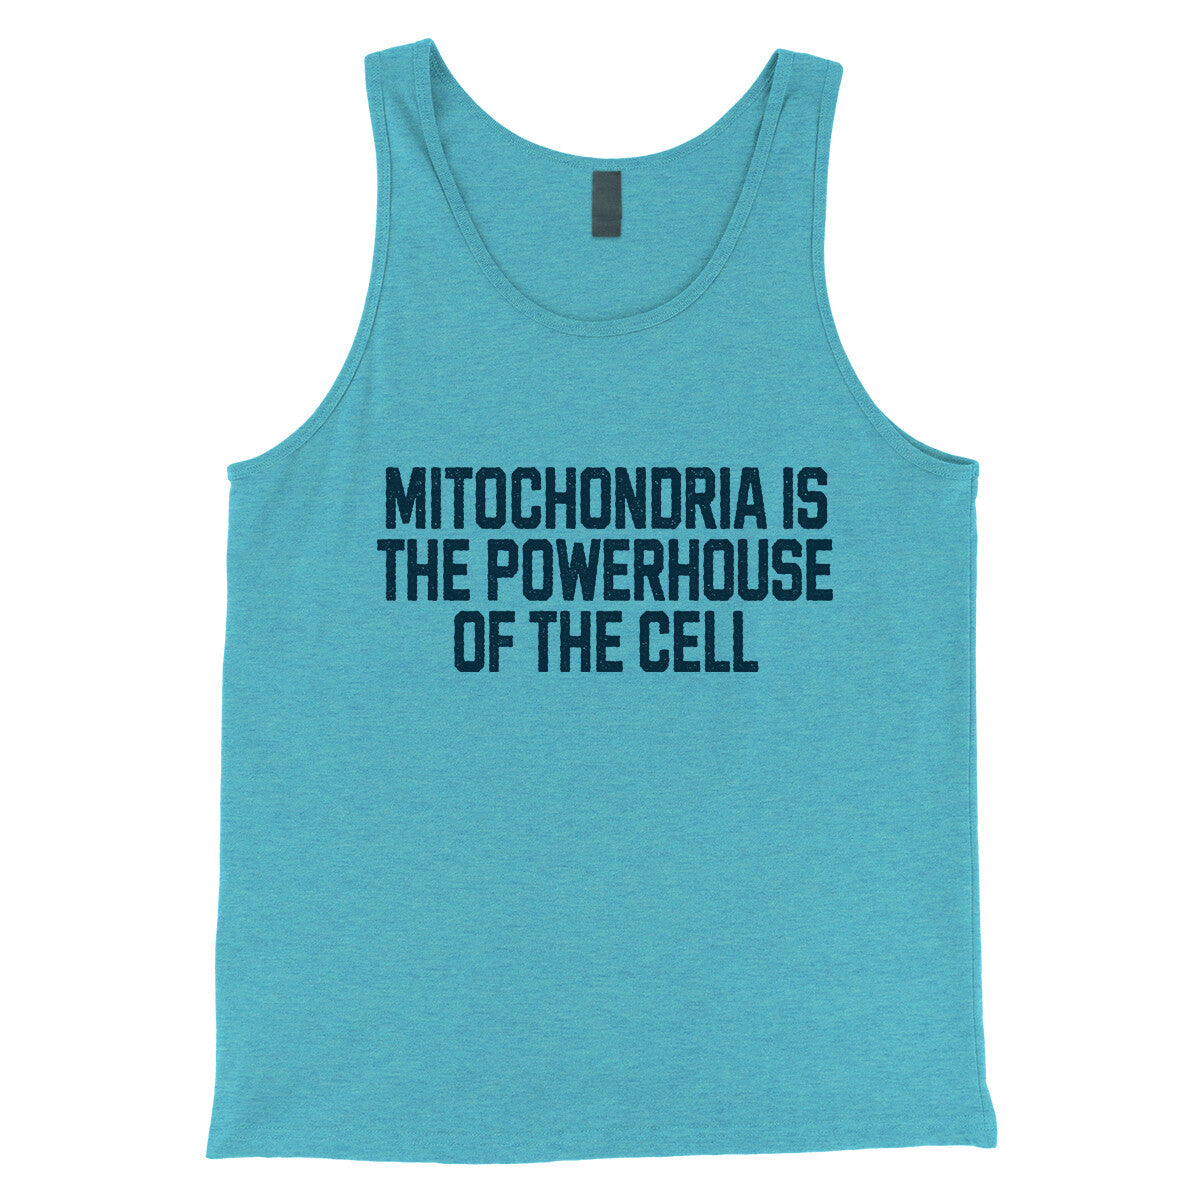 Mitochondria is the Powerhouse of the Cell in Aqua Triblend Color